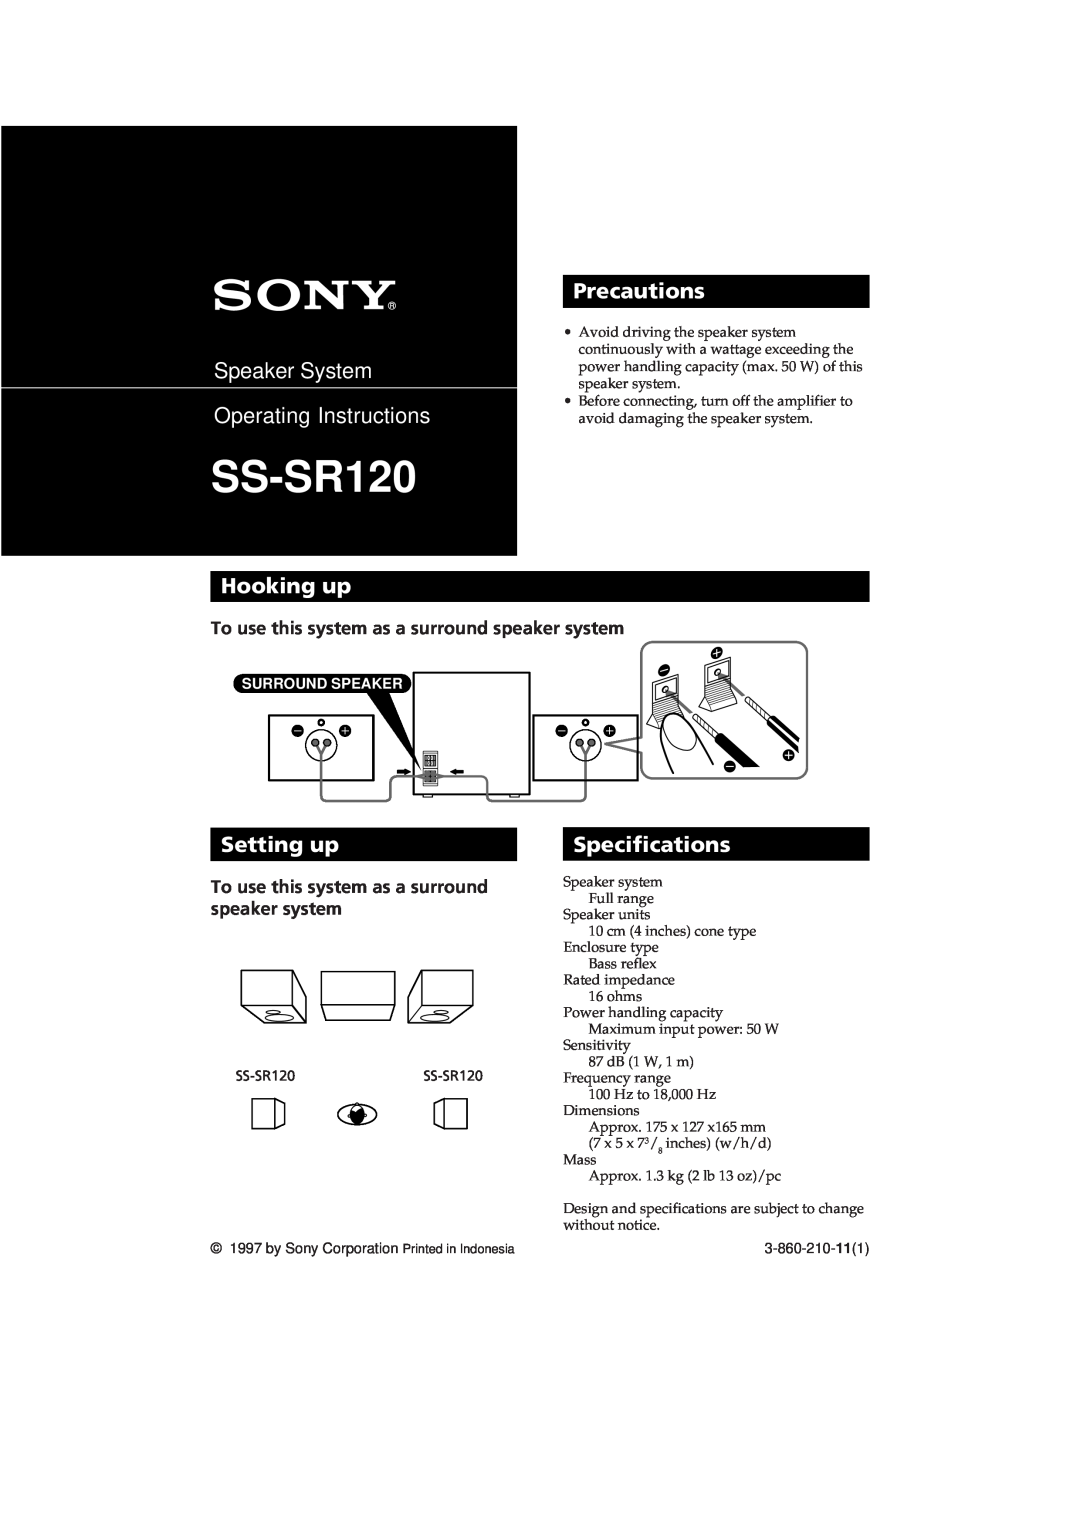 Sony SS-SR120 specifications Speaker System Operating Instructions, Precautions, Hooking up, Setting up, Specifications 